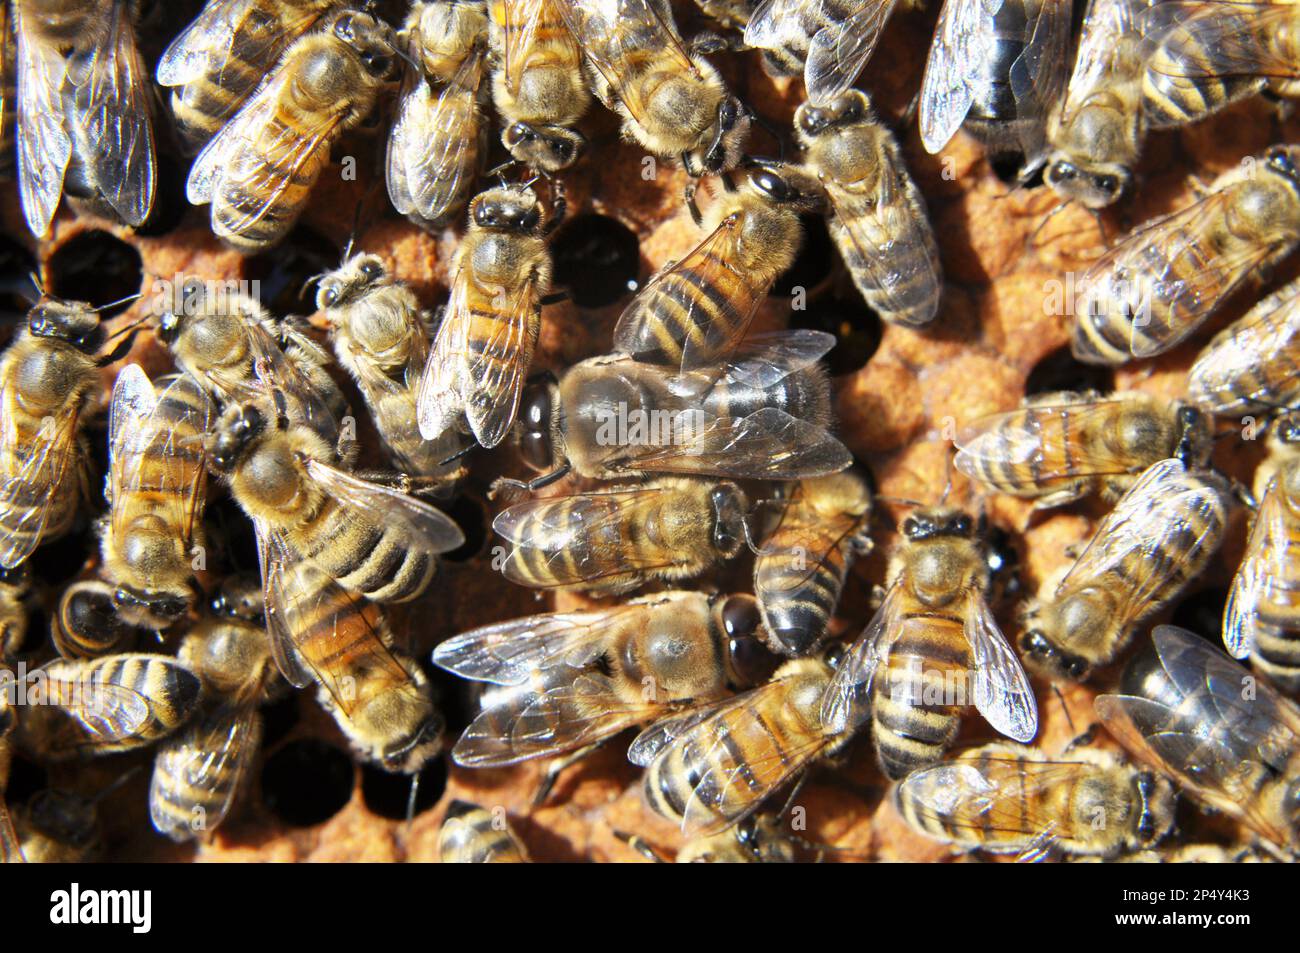 Drones and worker bees on part of the comb Stock Photo